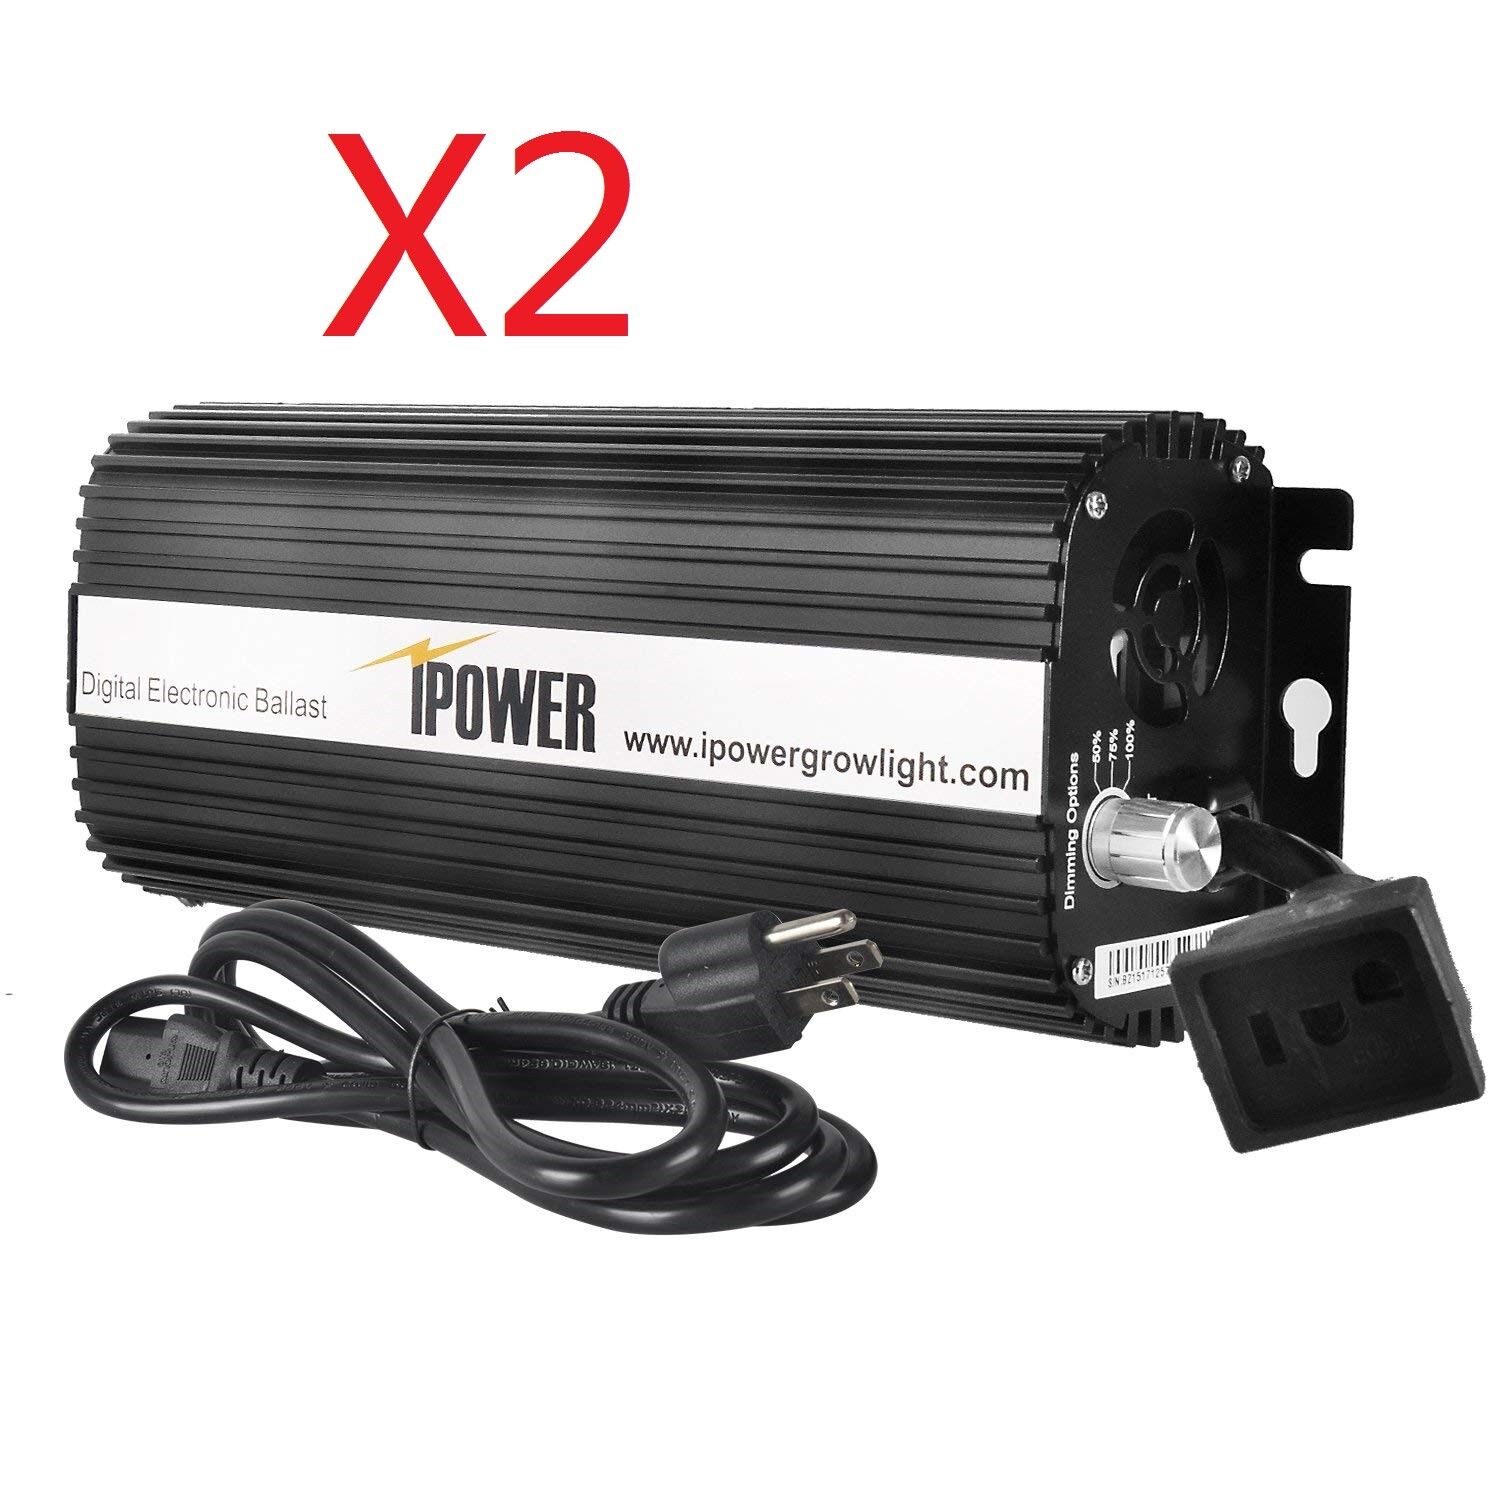 iPower 400W Digital Dimmable Electronic Ballast for HPS MH Grow Light 1/2-Pack